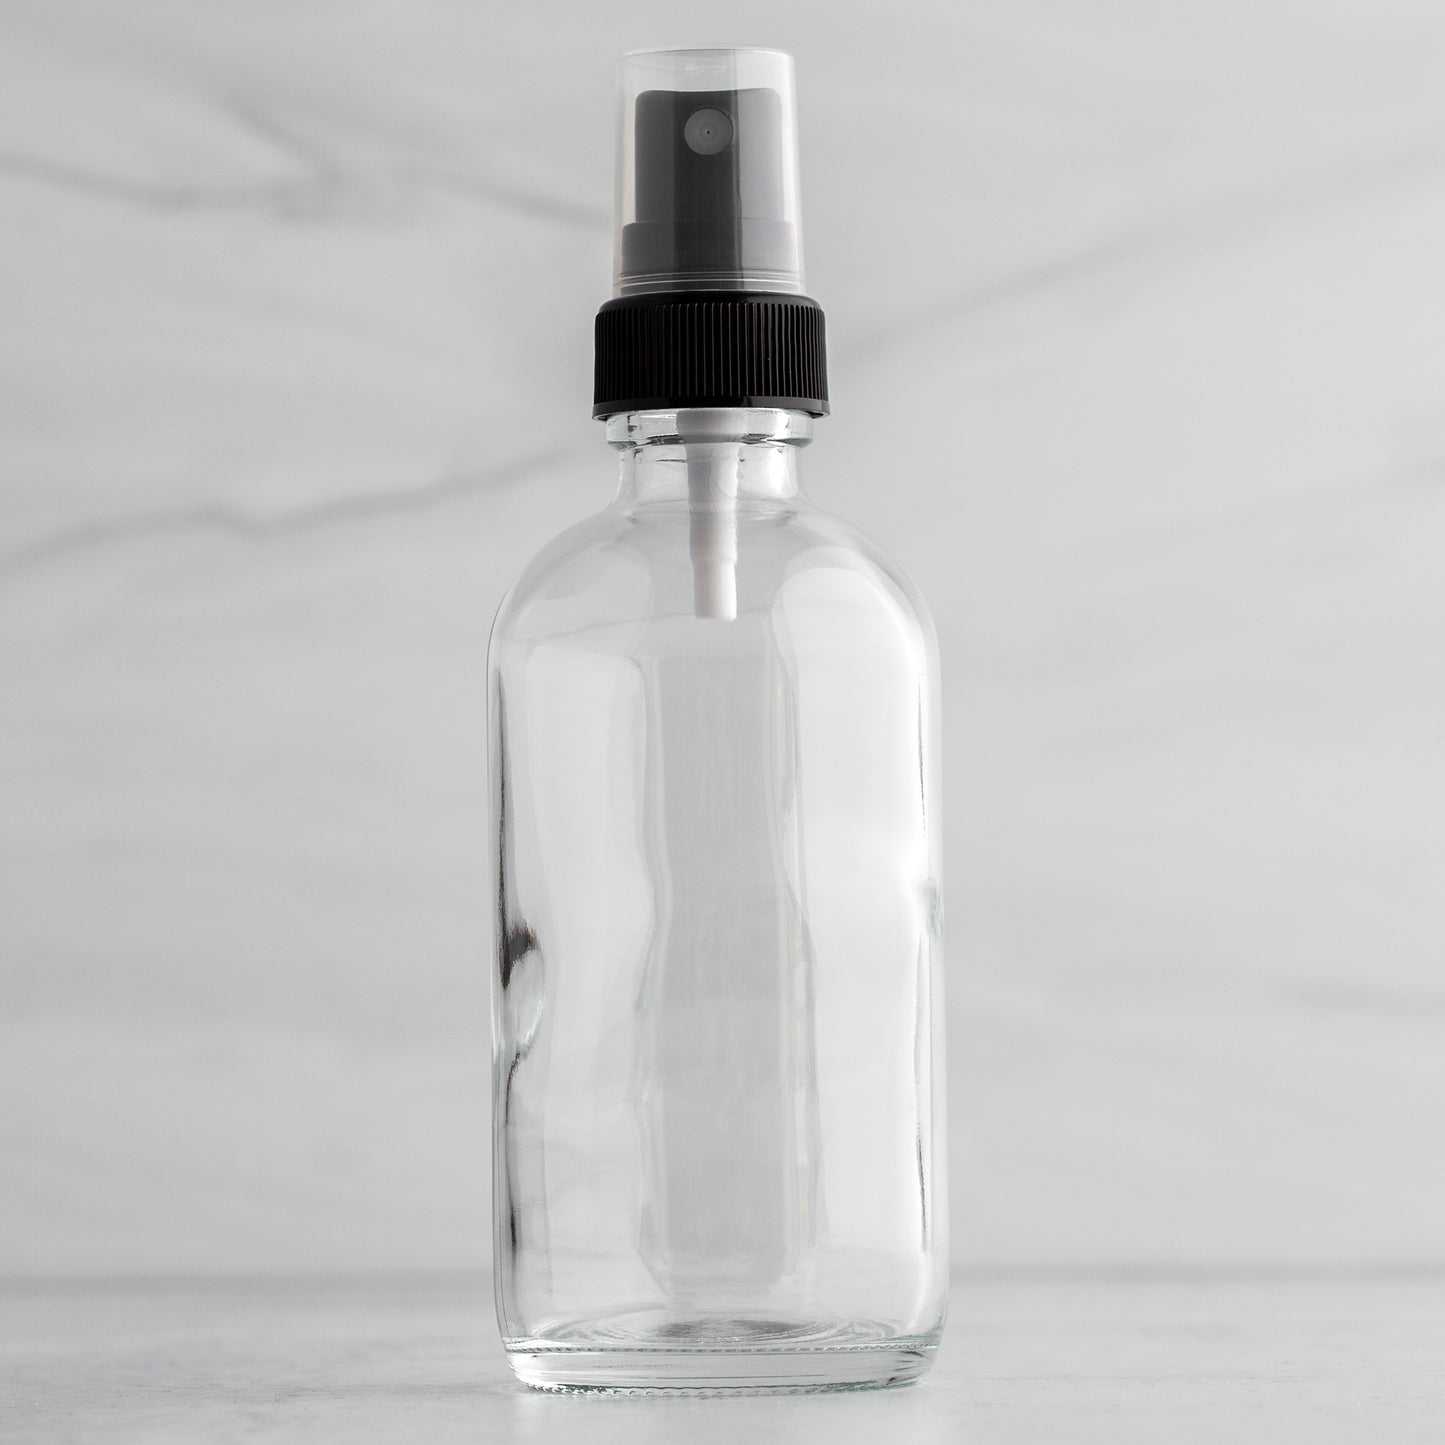 4 oz Clear Glass Bottle with Black Mister